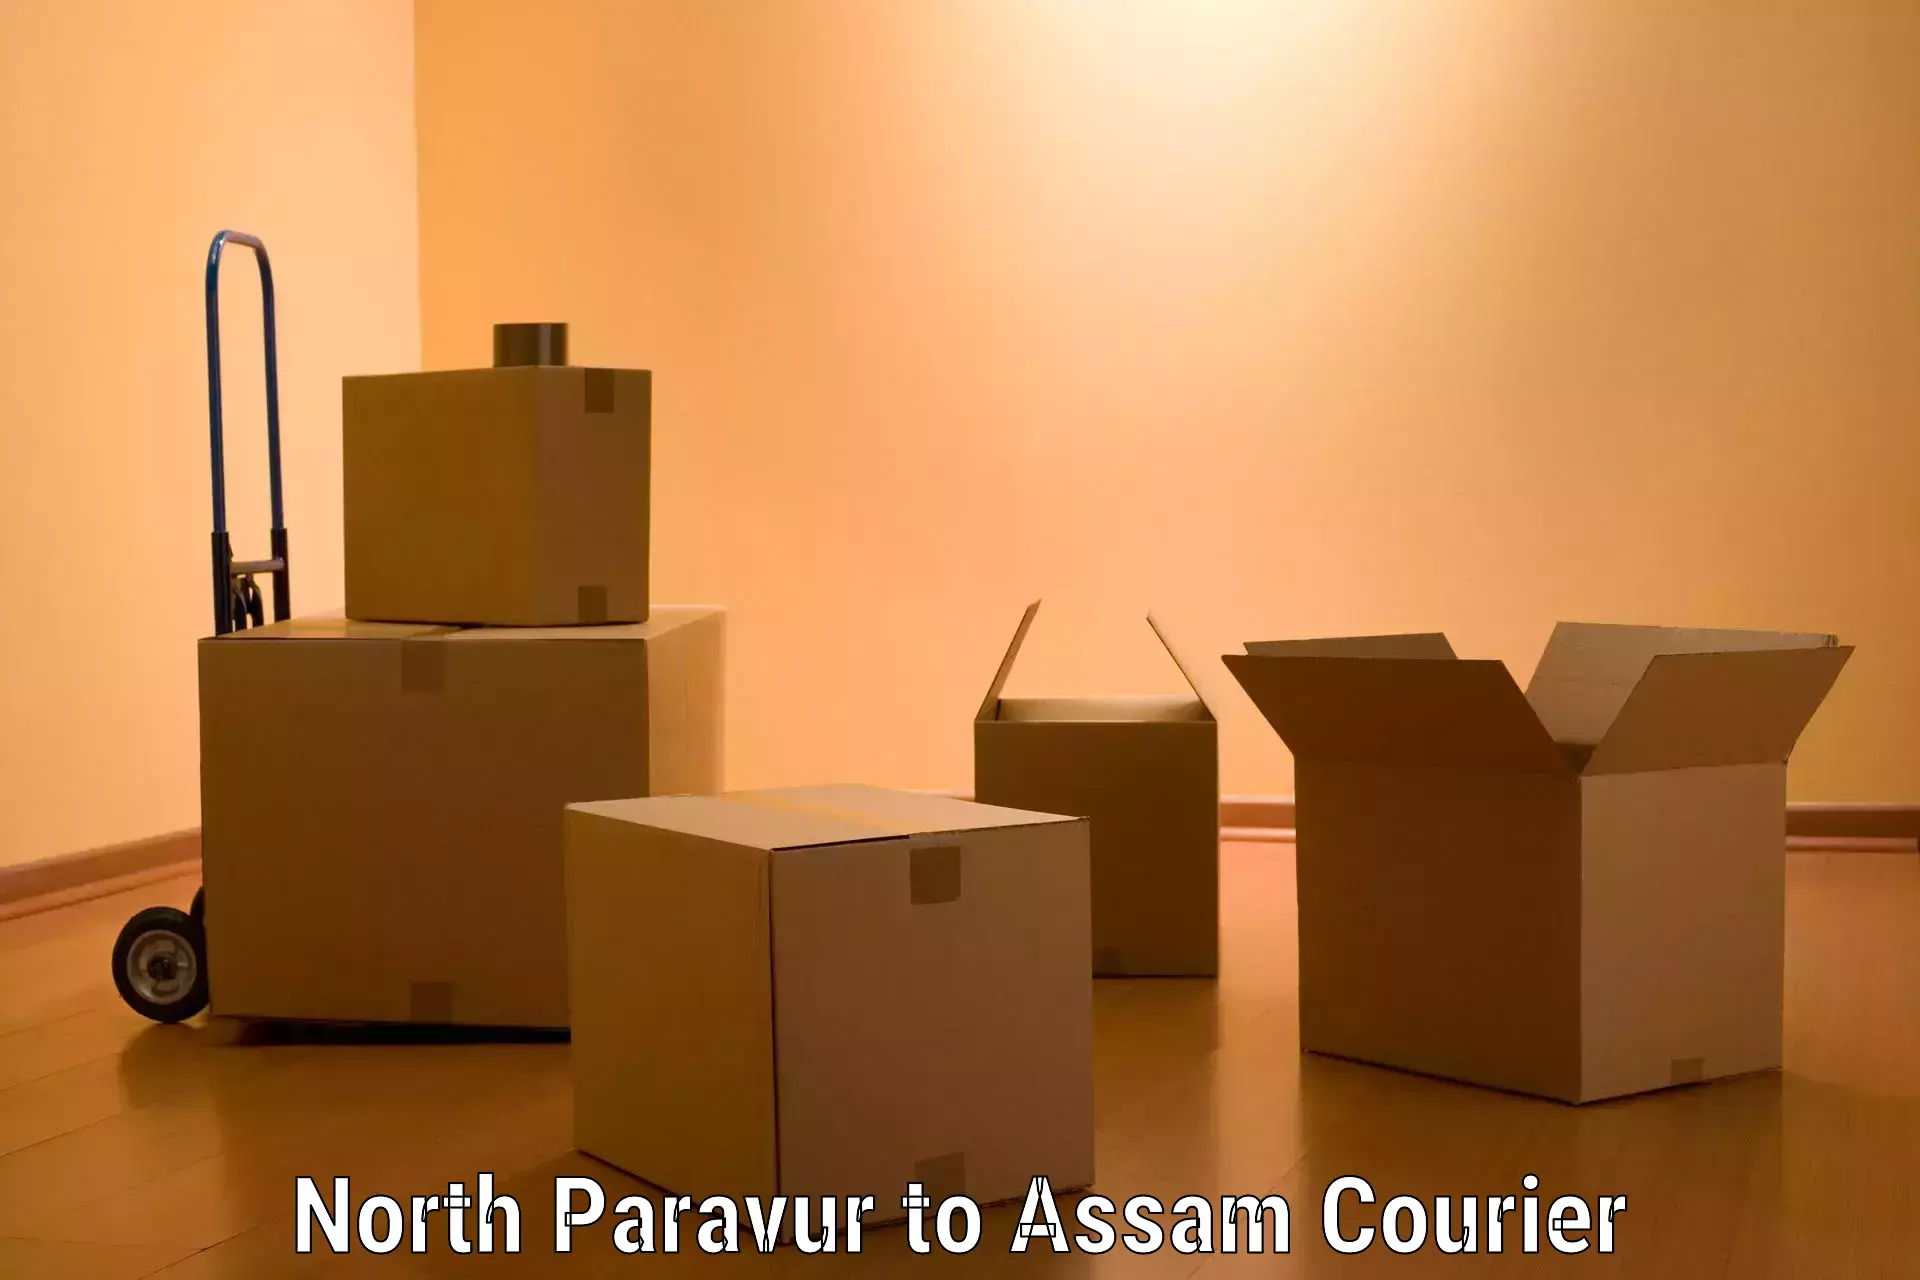 Furniture delivery service North Paravur to Marigaon